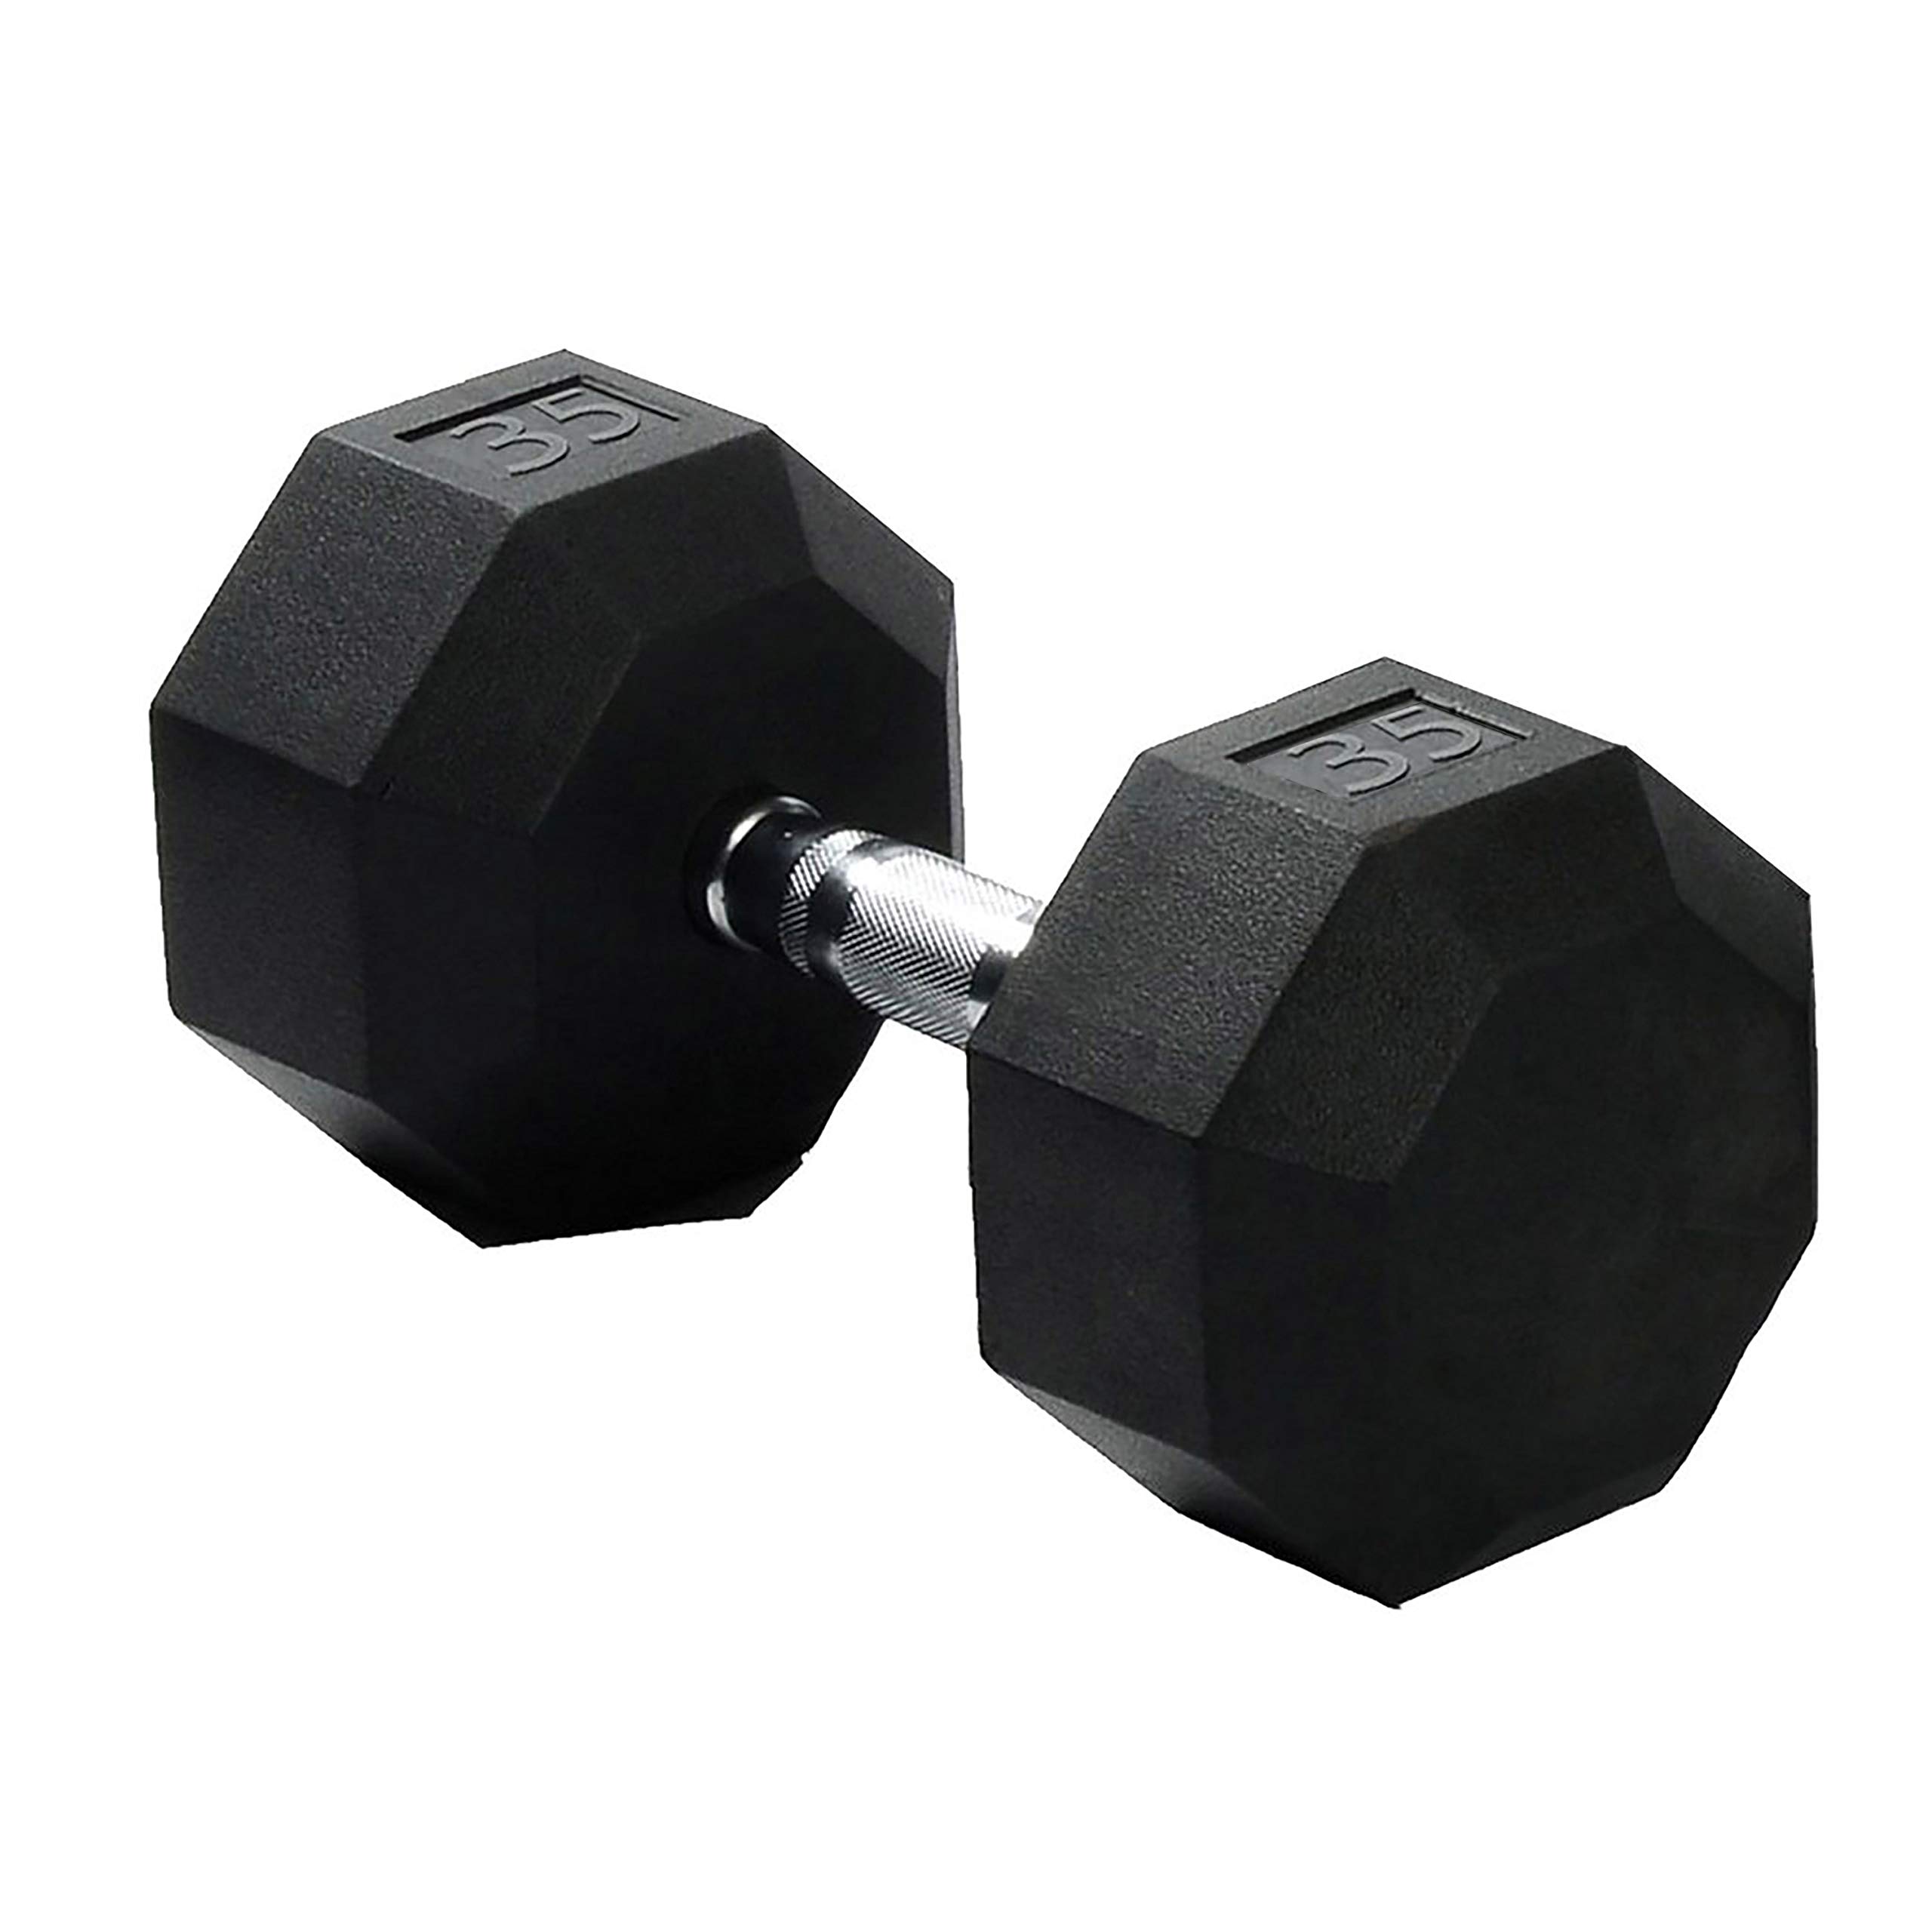 SPRI Dumbbell Hand Weight Single 35 Lb Rubber Hex Chrome Handle Exercise Fitness Dumbbell For Home Gym Equipment Workouts Strength Tr